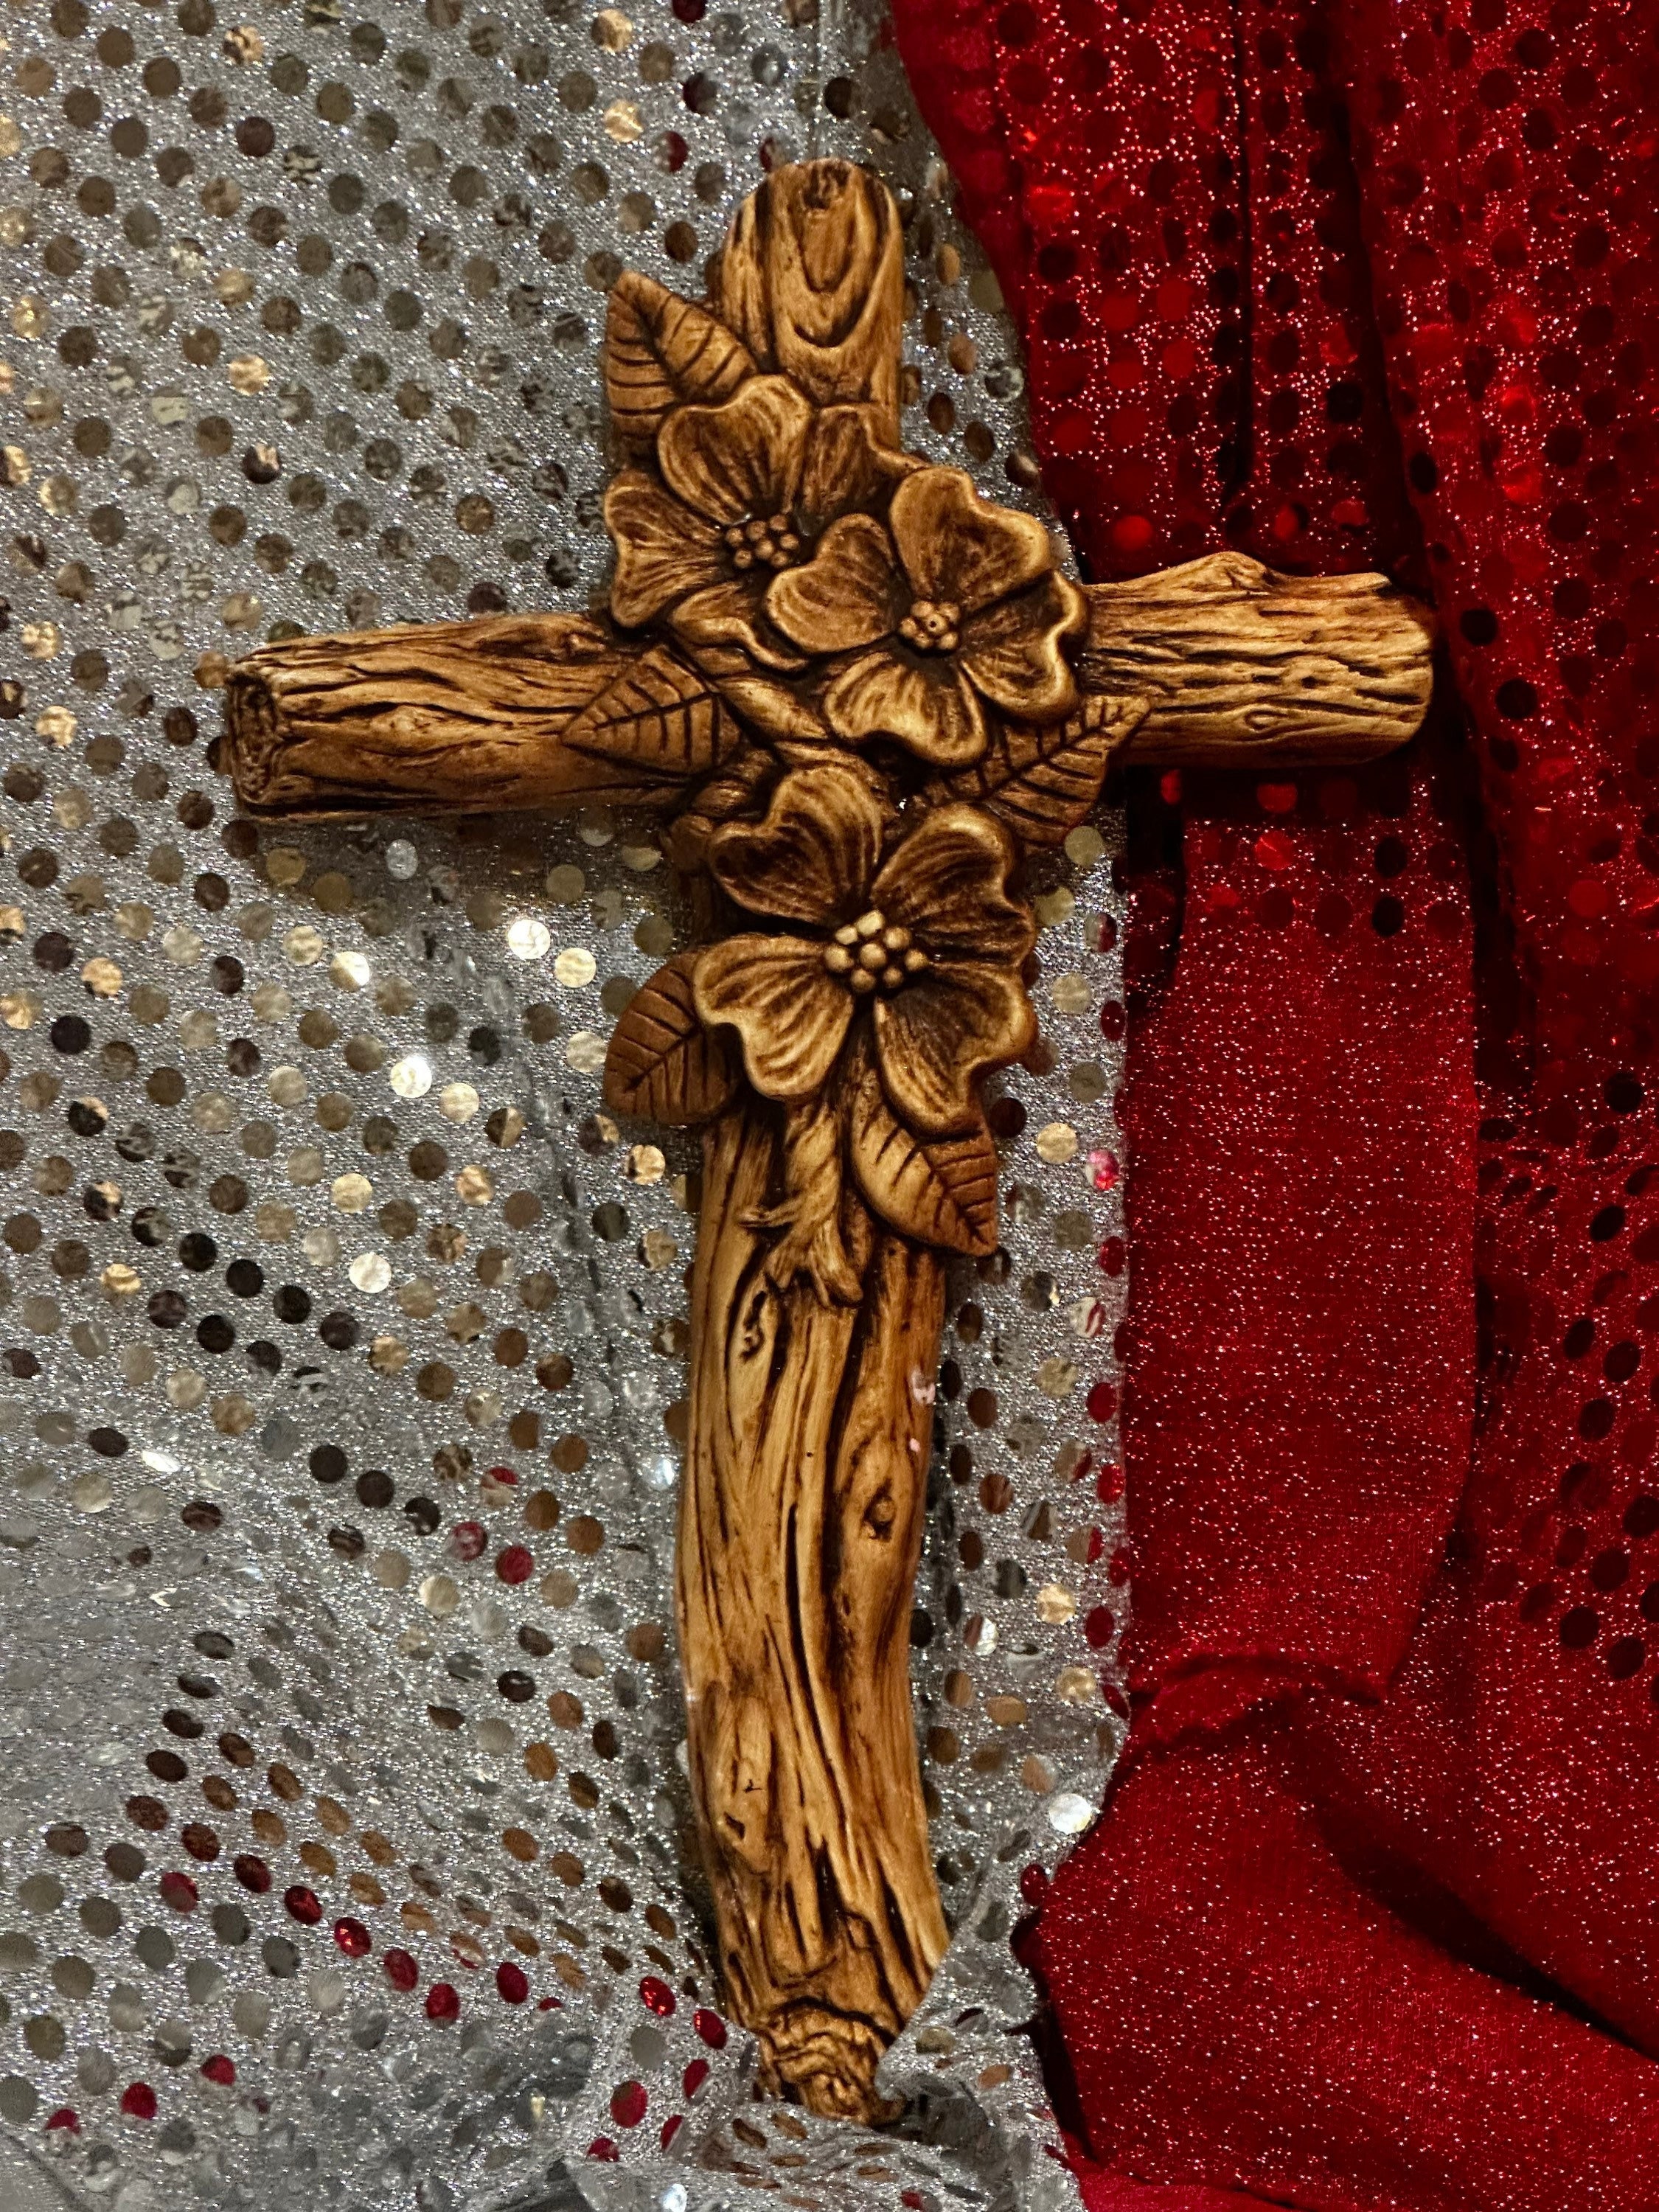  (Gold Christian Cross in The ofm of Tree) Patterned